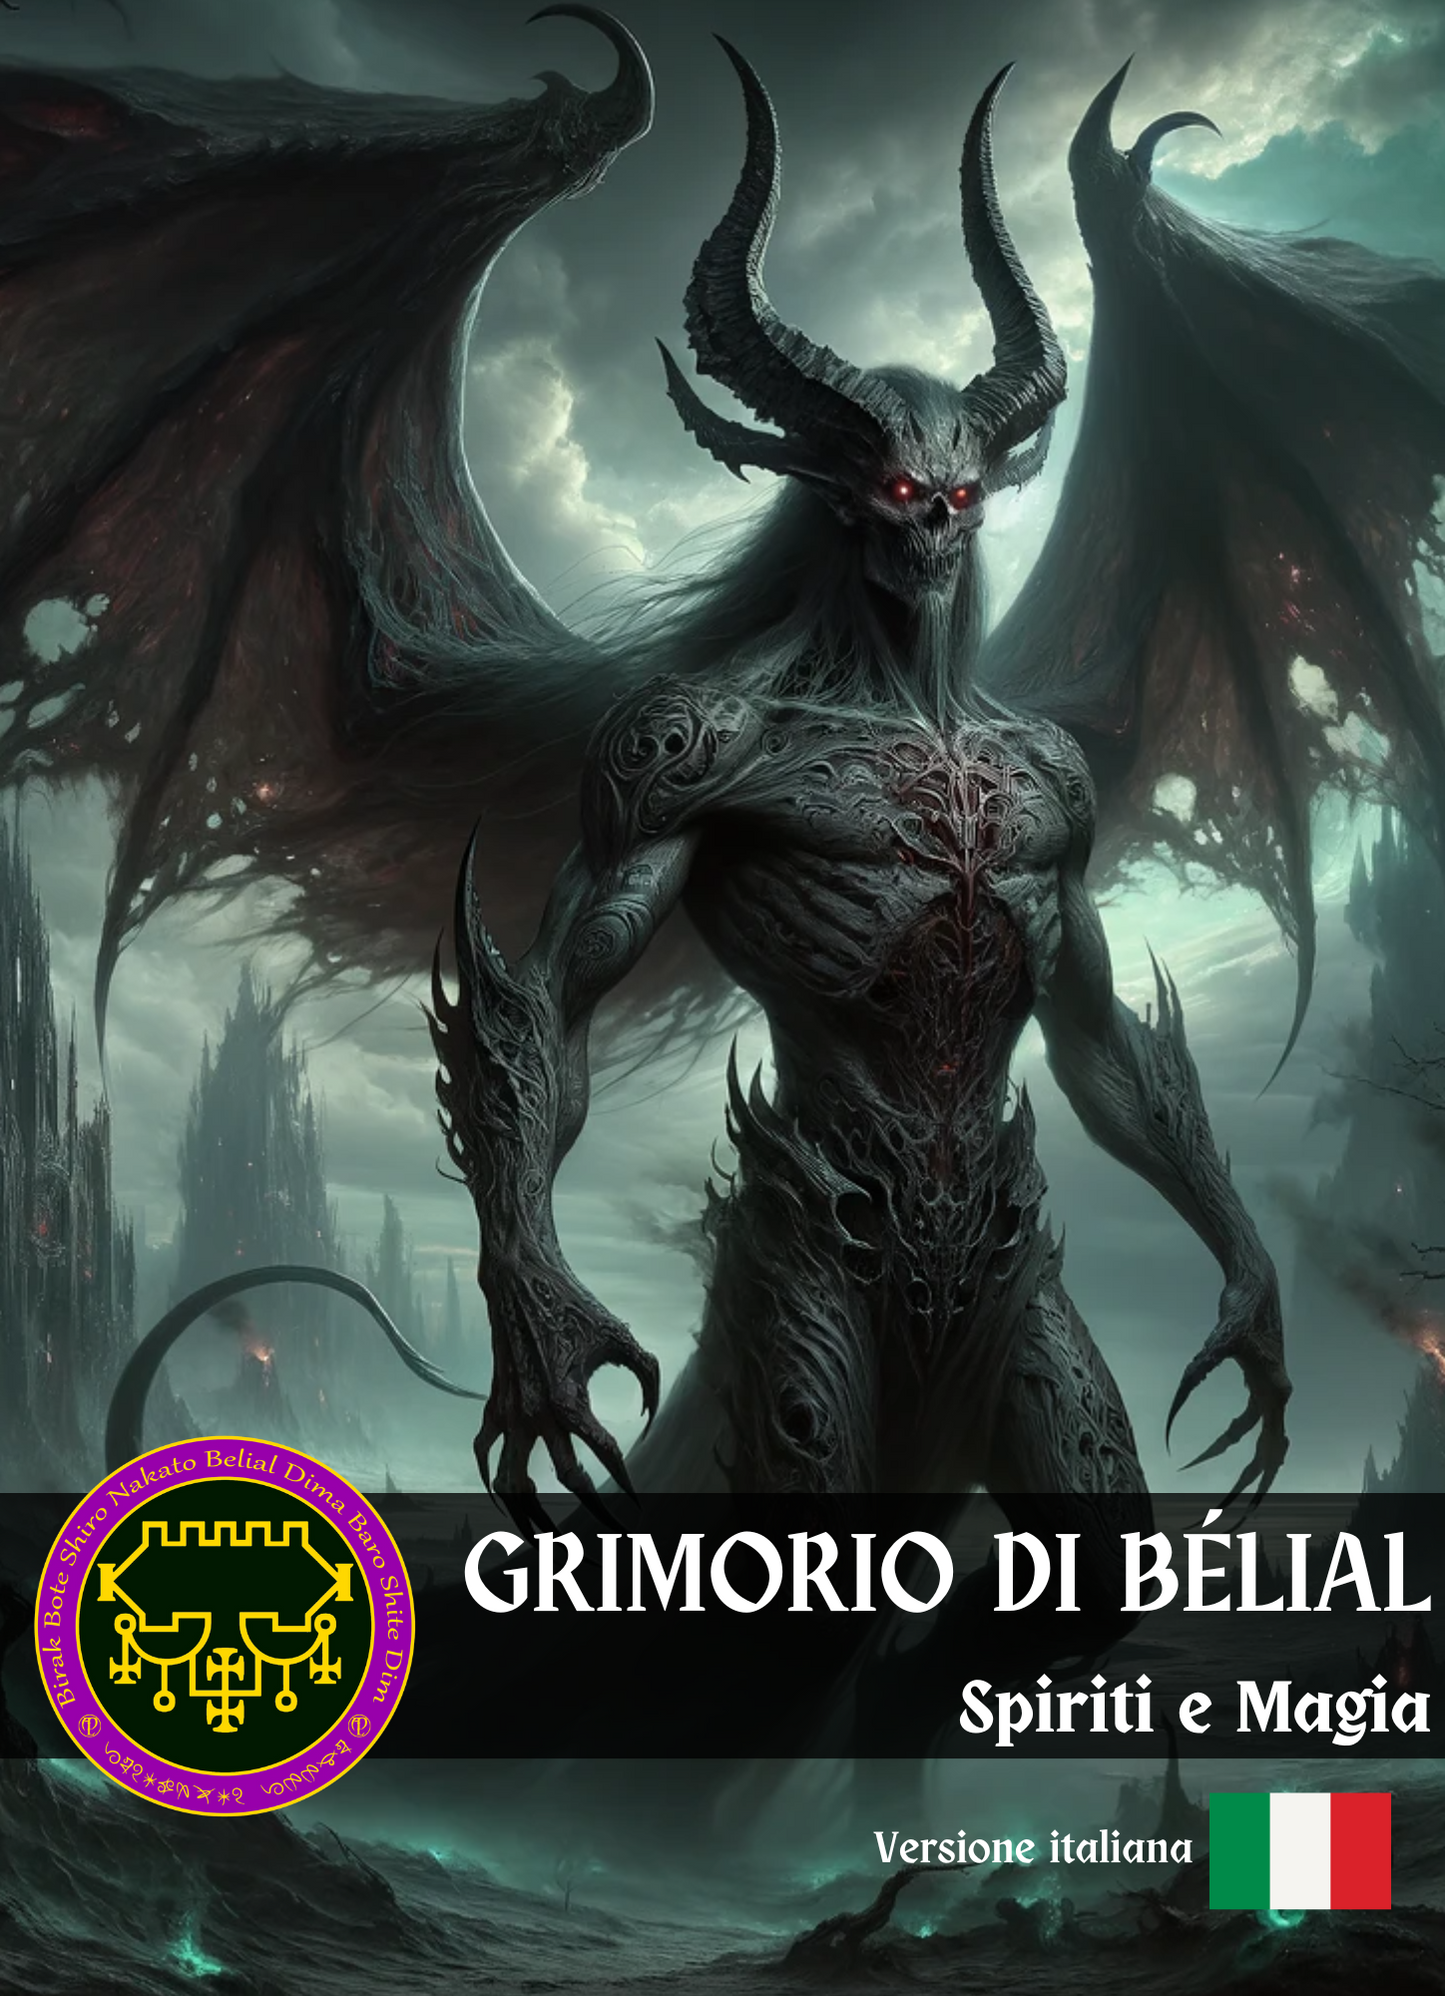 Grimoire na Belial Spells & Rituals for Business, Sex Set & Competition - Abraxas Amulets ® Magic ♾️ Talismans ♾️ Ƙaddamarwa